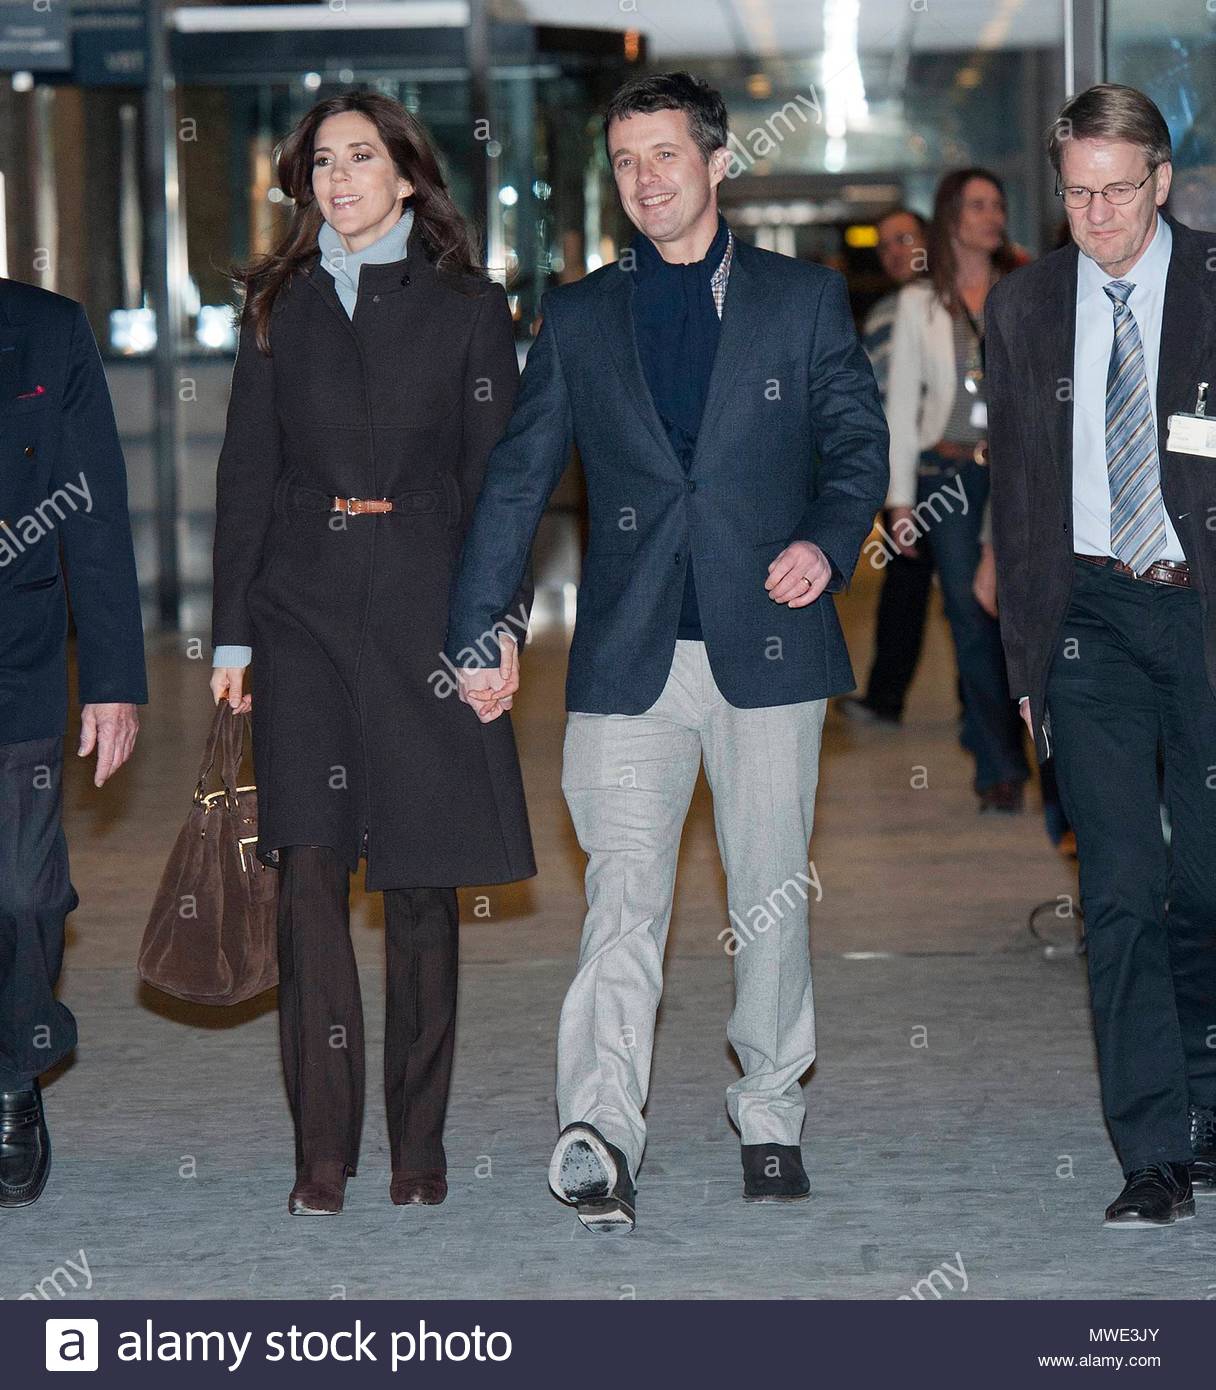 crown-princess-mary-crown-prince-frederik-hrh-crown-princess-mary-hrh-crown-prince-frederik-hm-queen-margrethe-and-hrh-prince-henrik-arrive-at-rigshospitalet-in-copenhagen-the-newborn-princess-and-her-mother-hrh-princess-marie-of-denmark-prince-joachim-arrives-with-his-sons-prince-henrik-prince-nikolai-and-prince-felix-to-see-their-new-sister-photo-martin-hoeien-all-over-press-denmark-as-MWE3JY.jpg